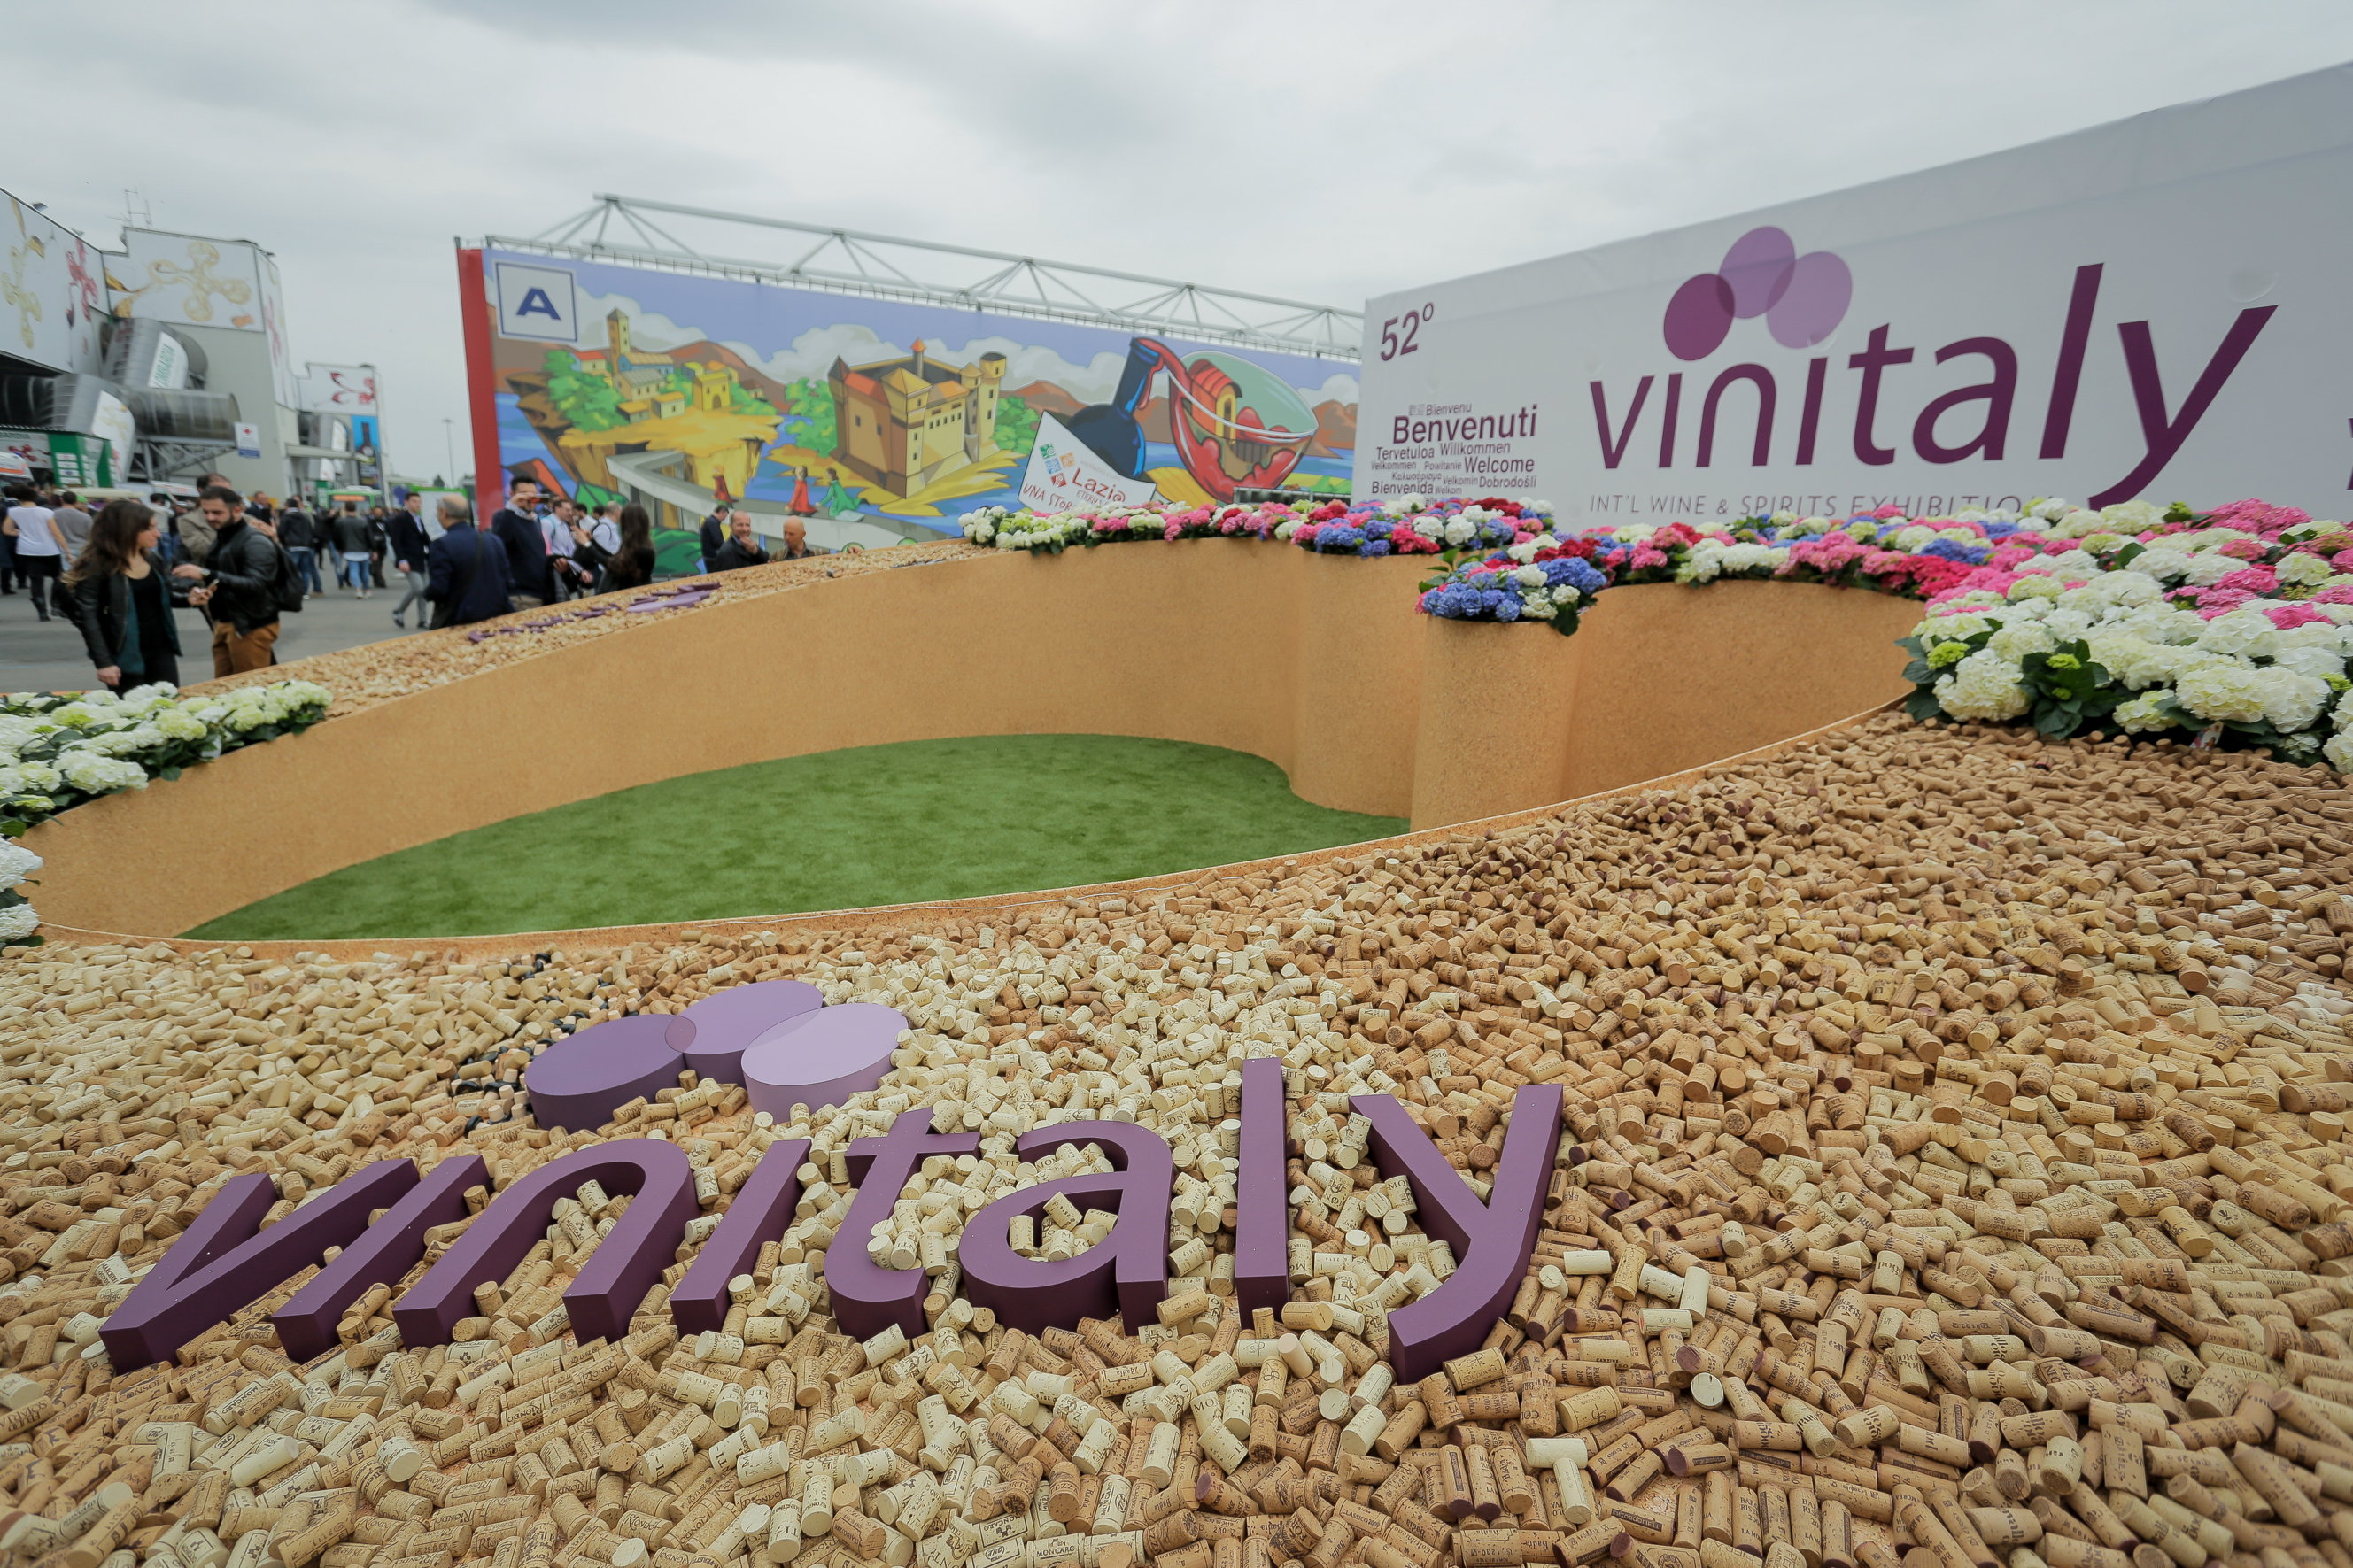 Vinitaly 2019, wine & more: the art of star chefs is at home in Verona